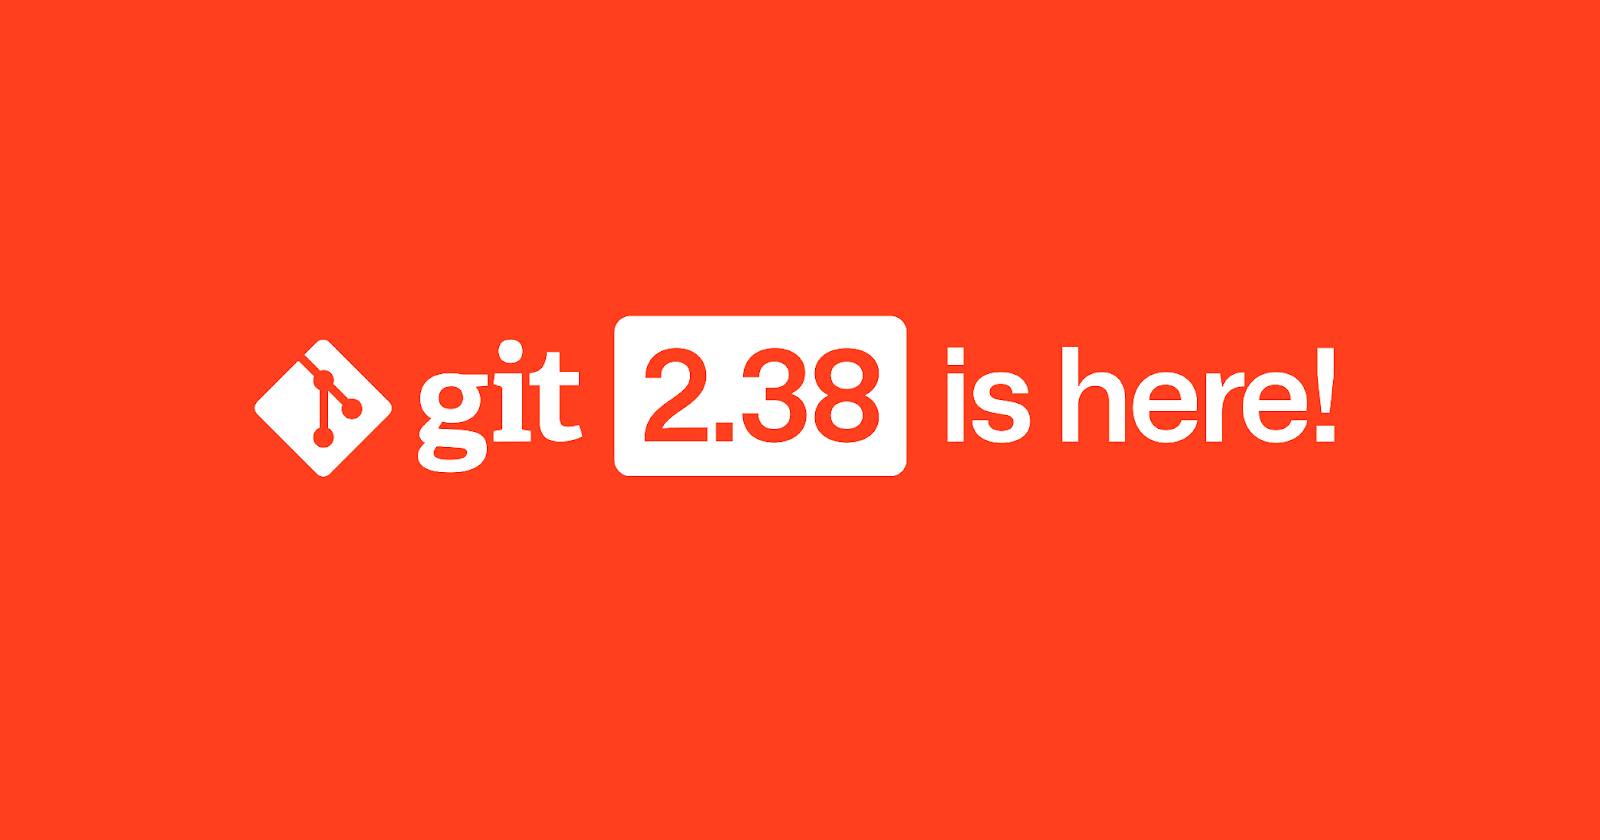 Highlights from Git 2.38